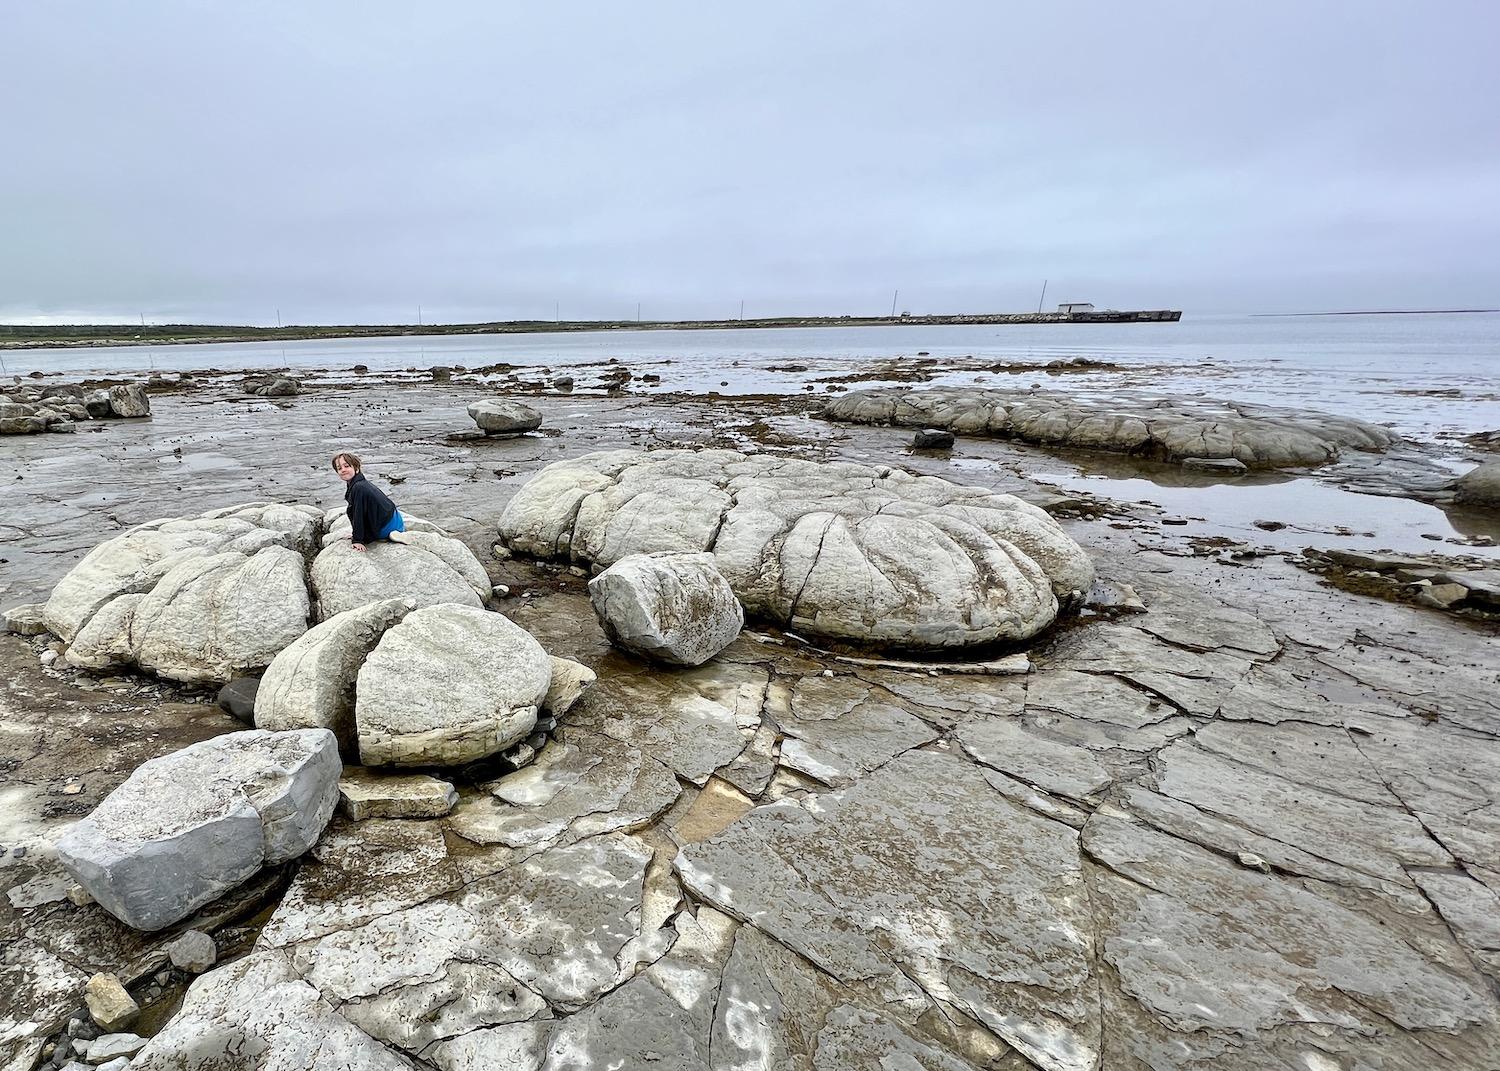 Flowers Cove is one of two places in the world to see 650-million-year-old fossil structures called thrombolites.